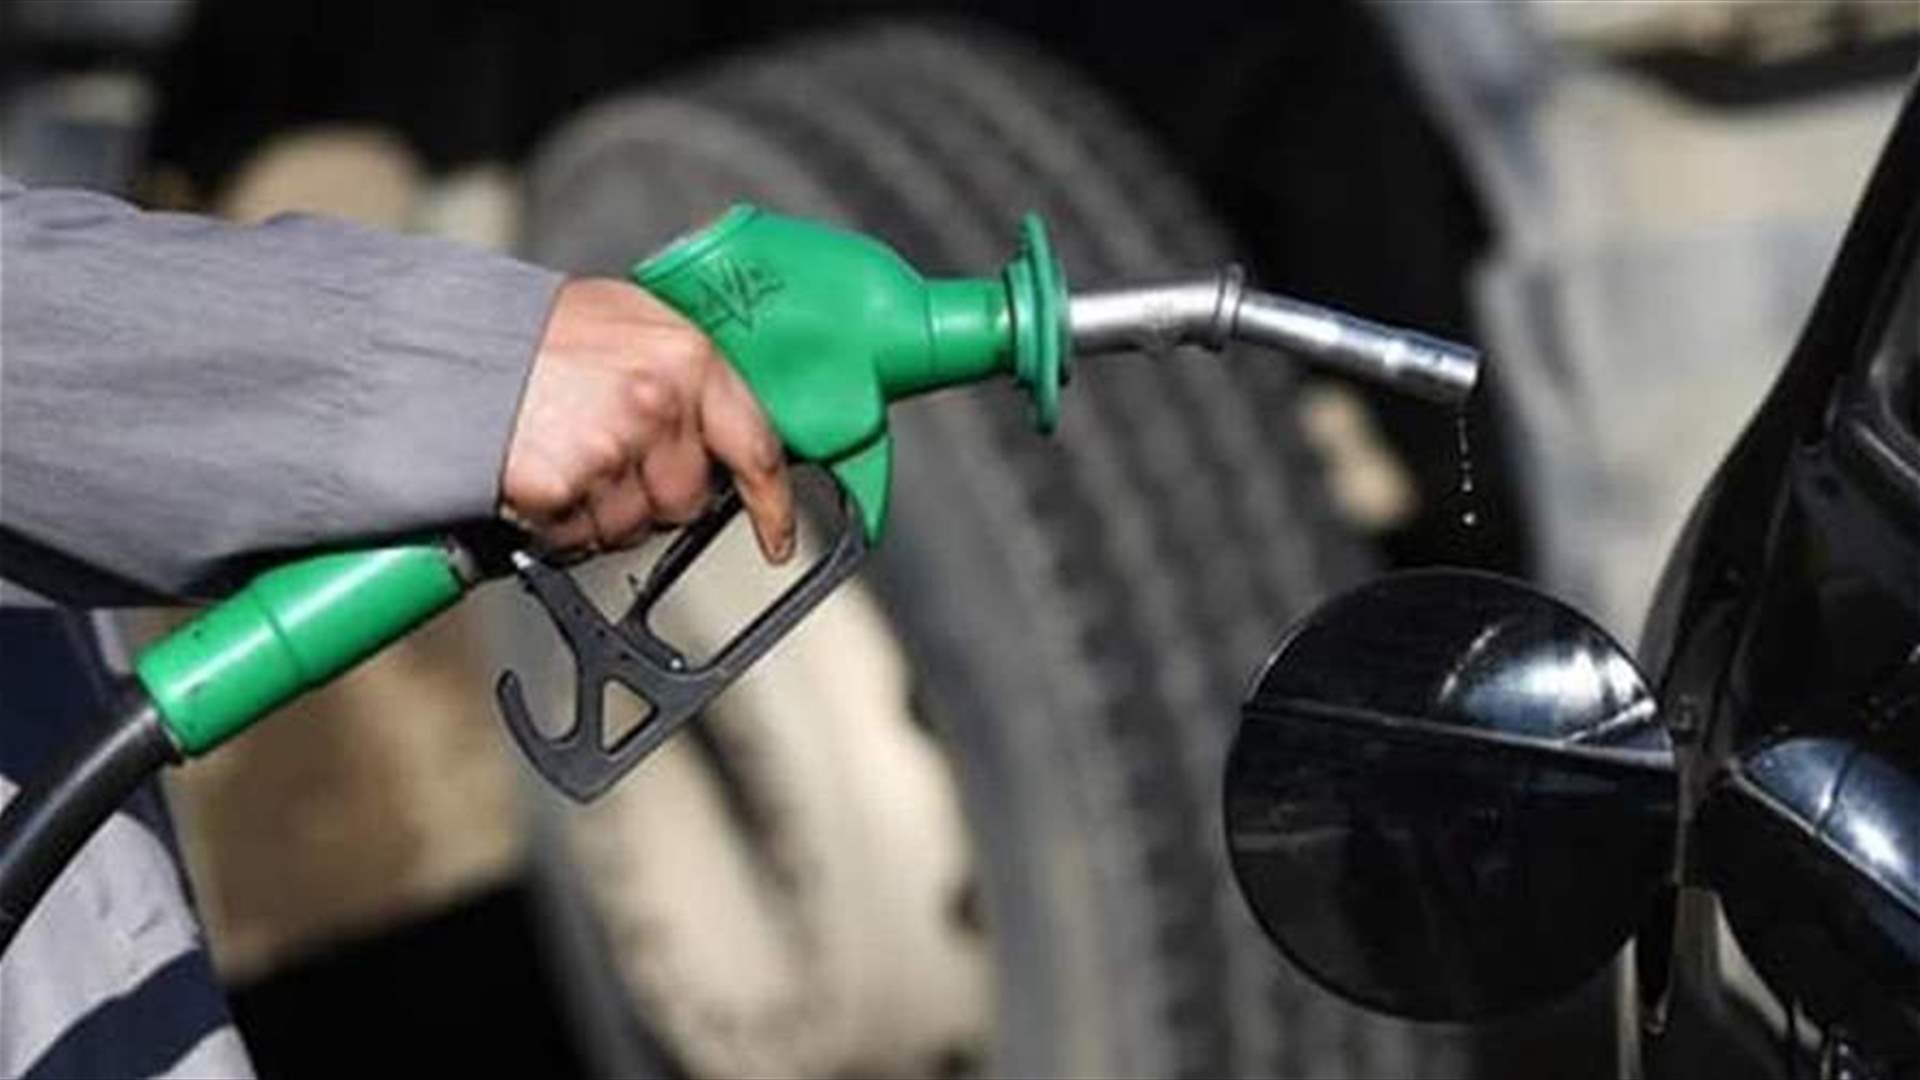 Price of gasoline increases by 14000 LBP